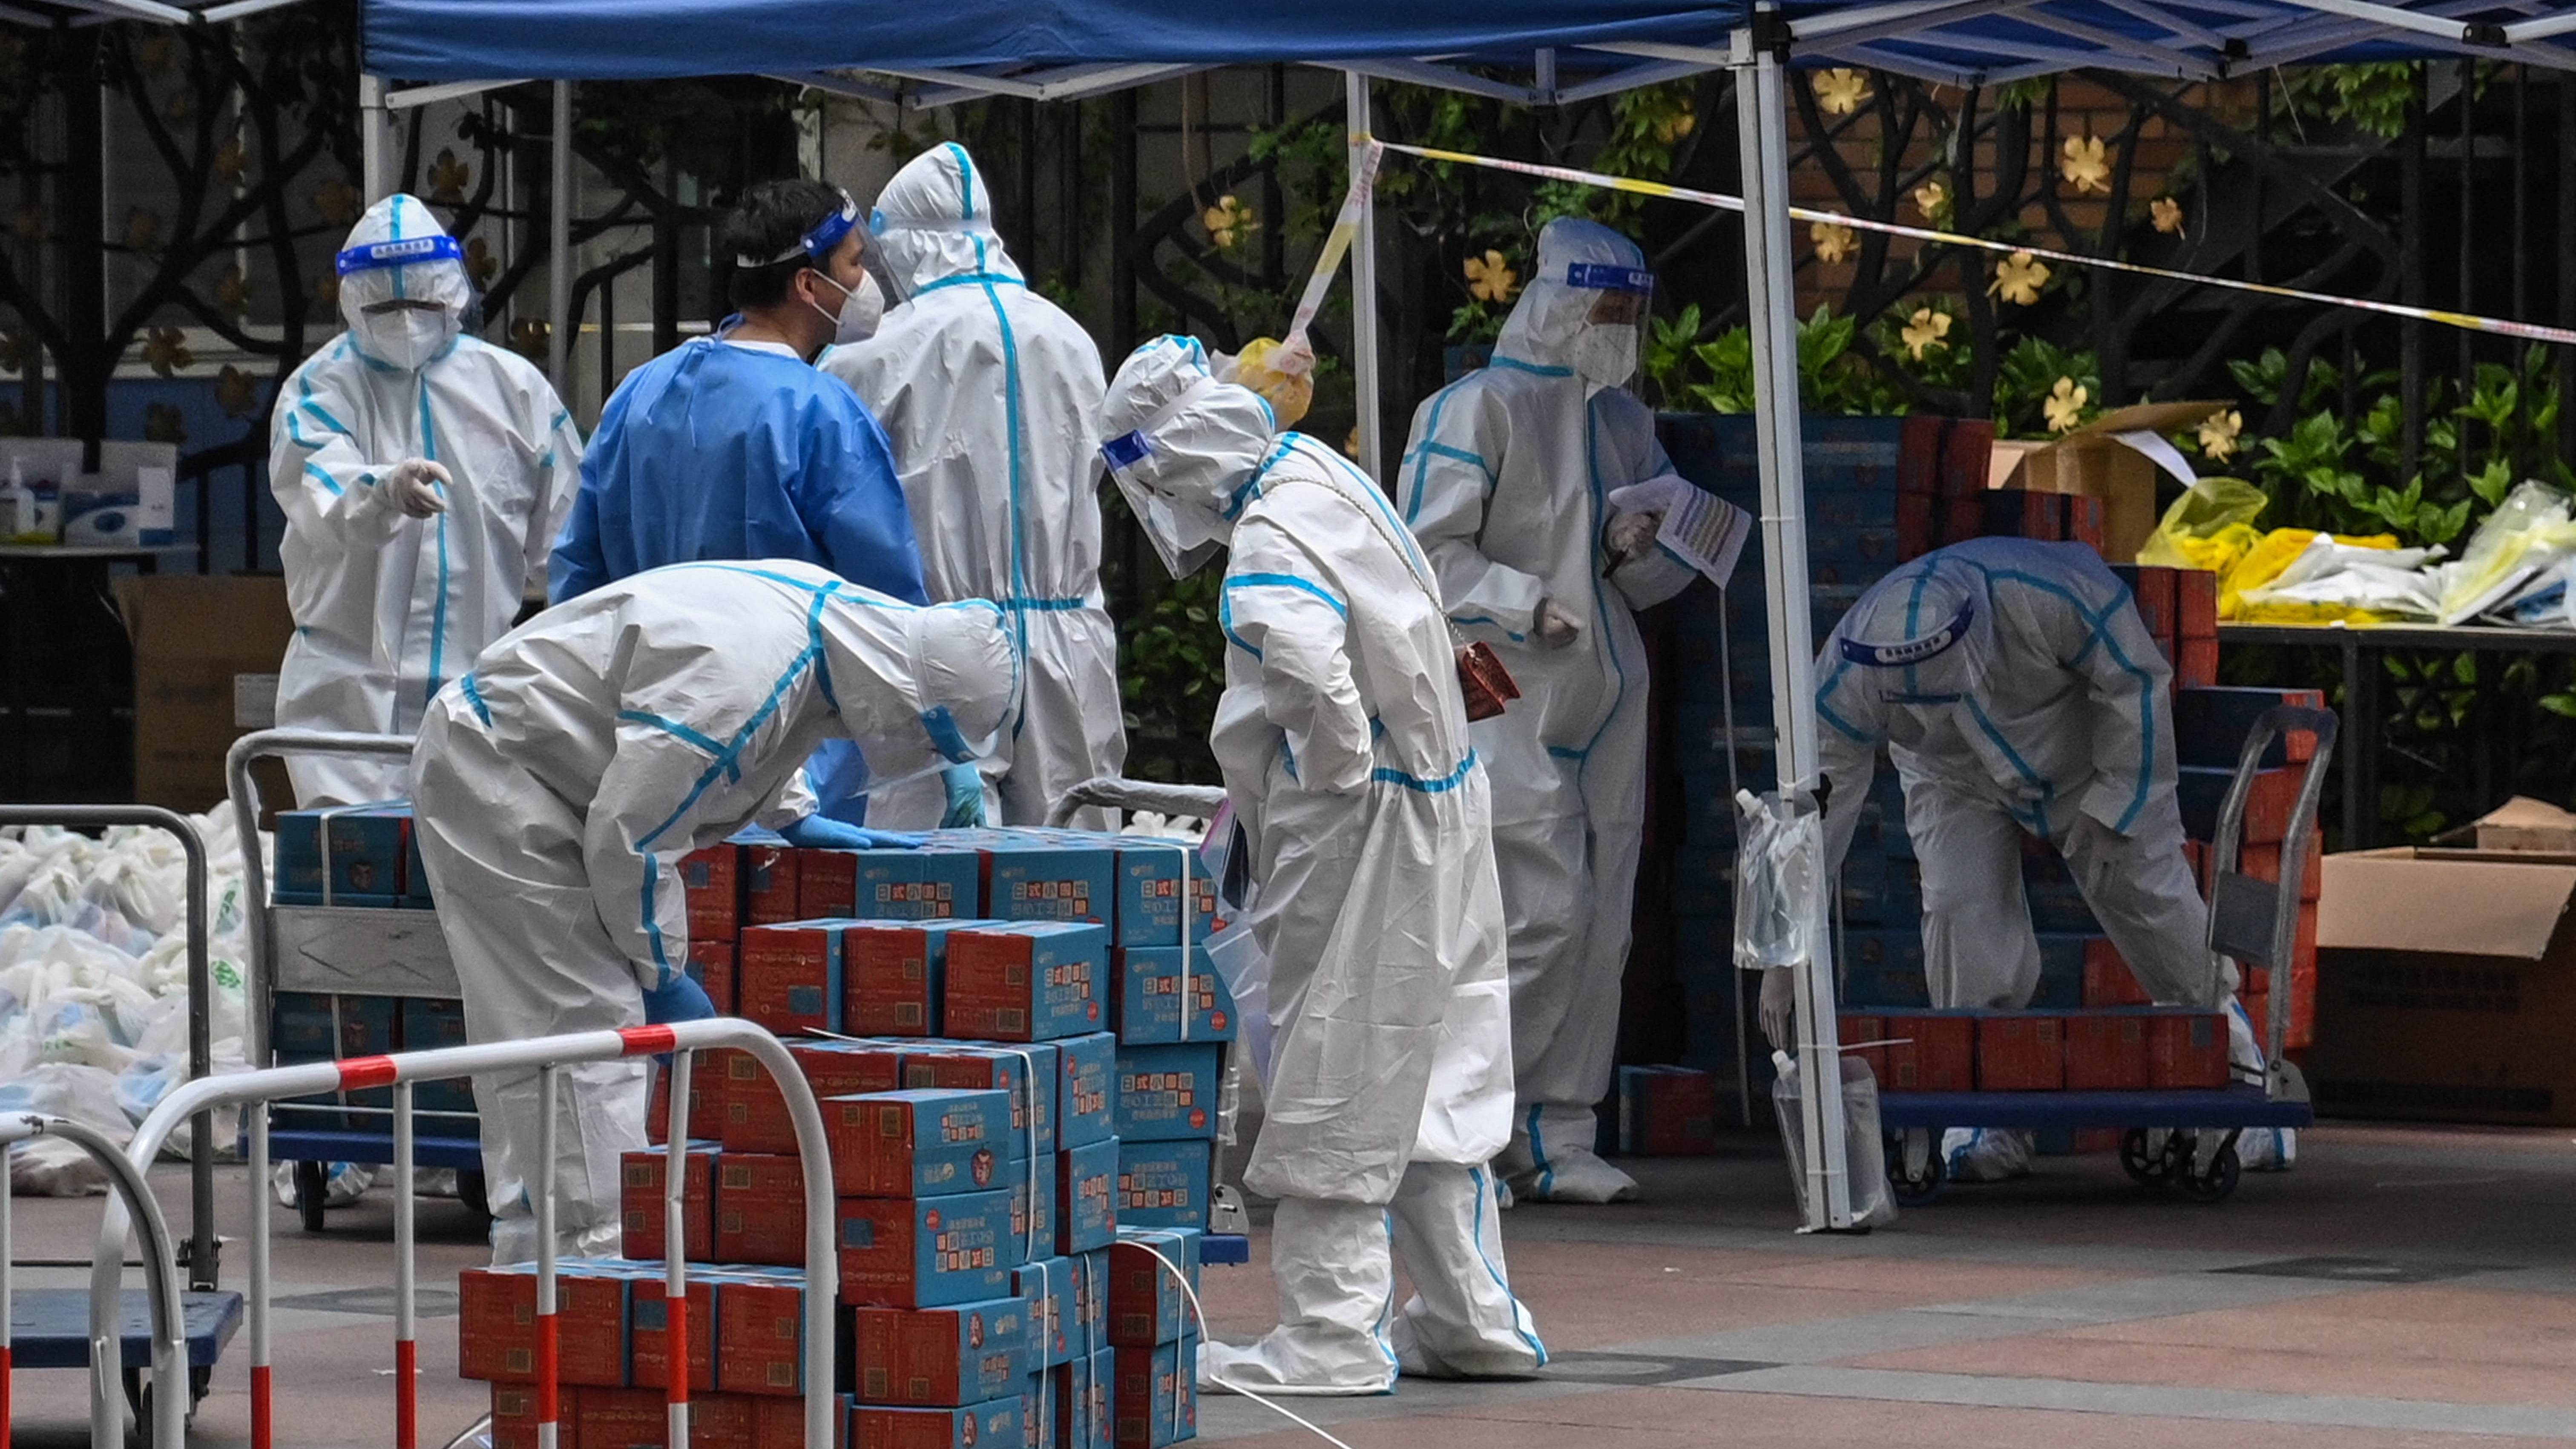 Workers wearing personal protective equipment (PPE) are seen next to food delivered by the local government for residents in a compound during a Covid-19 lockdown in the Jing'an district in Shanghai. Credit: AFP File Photo